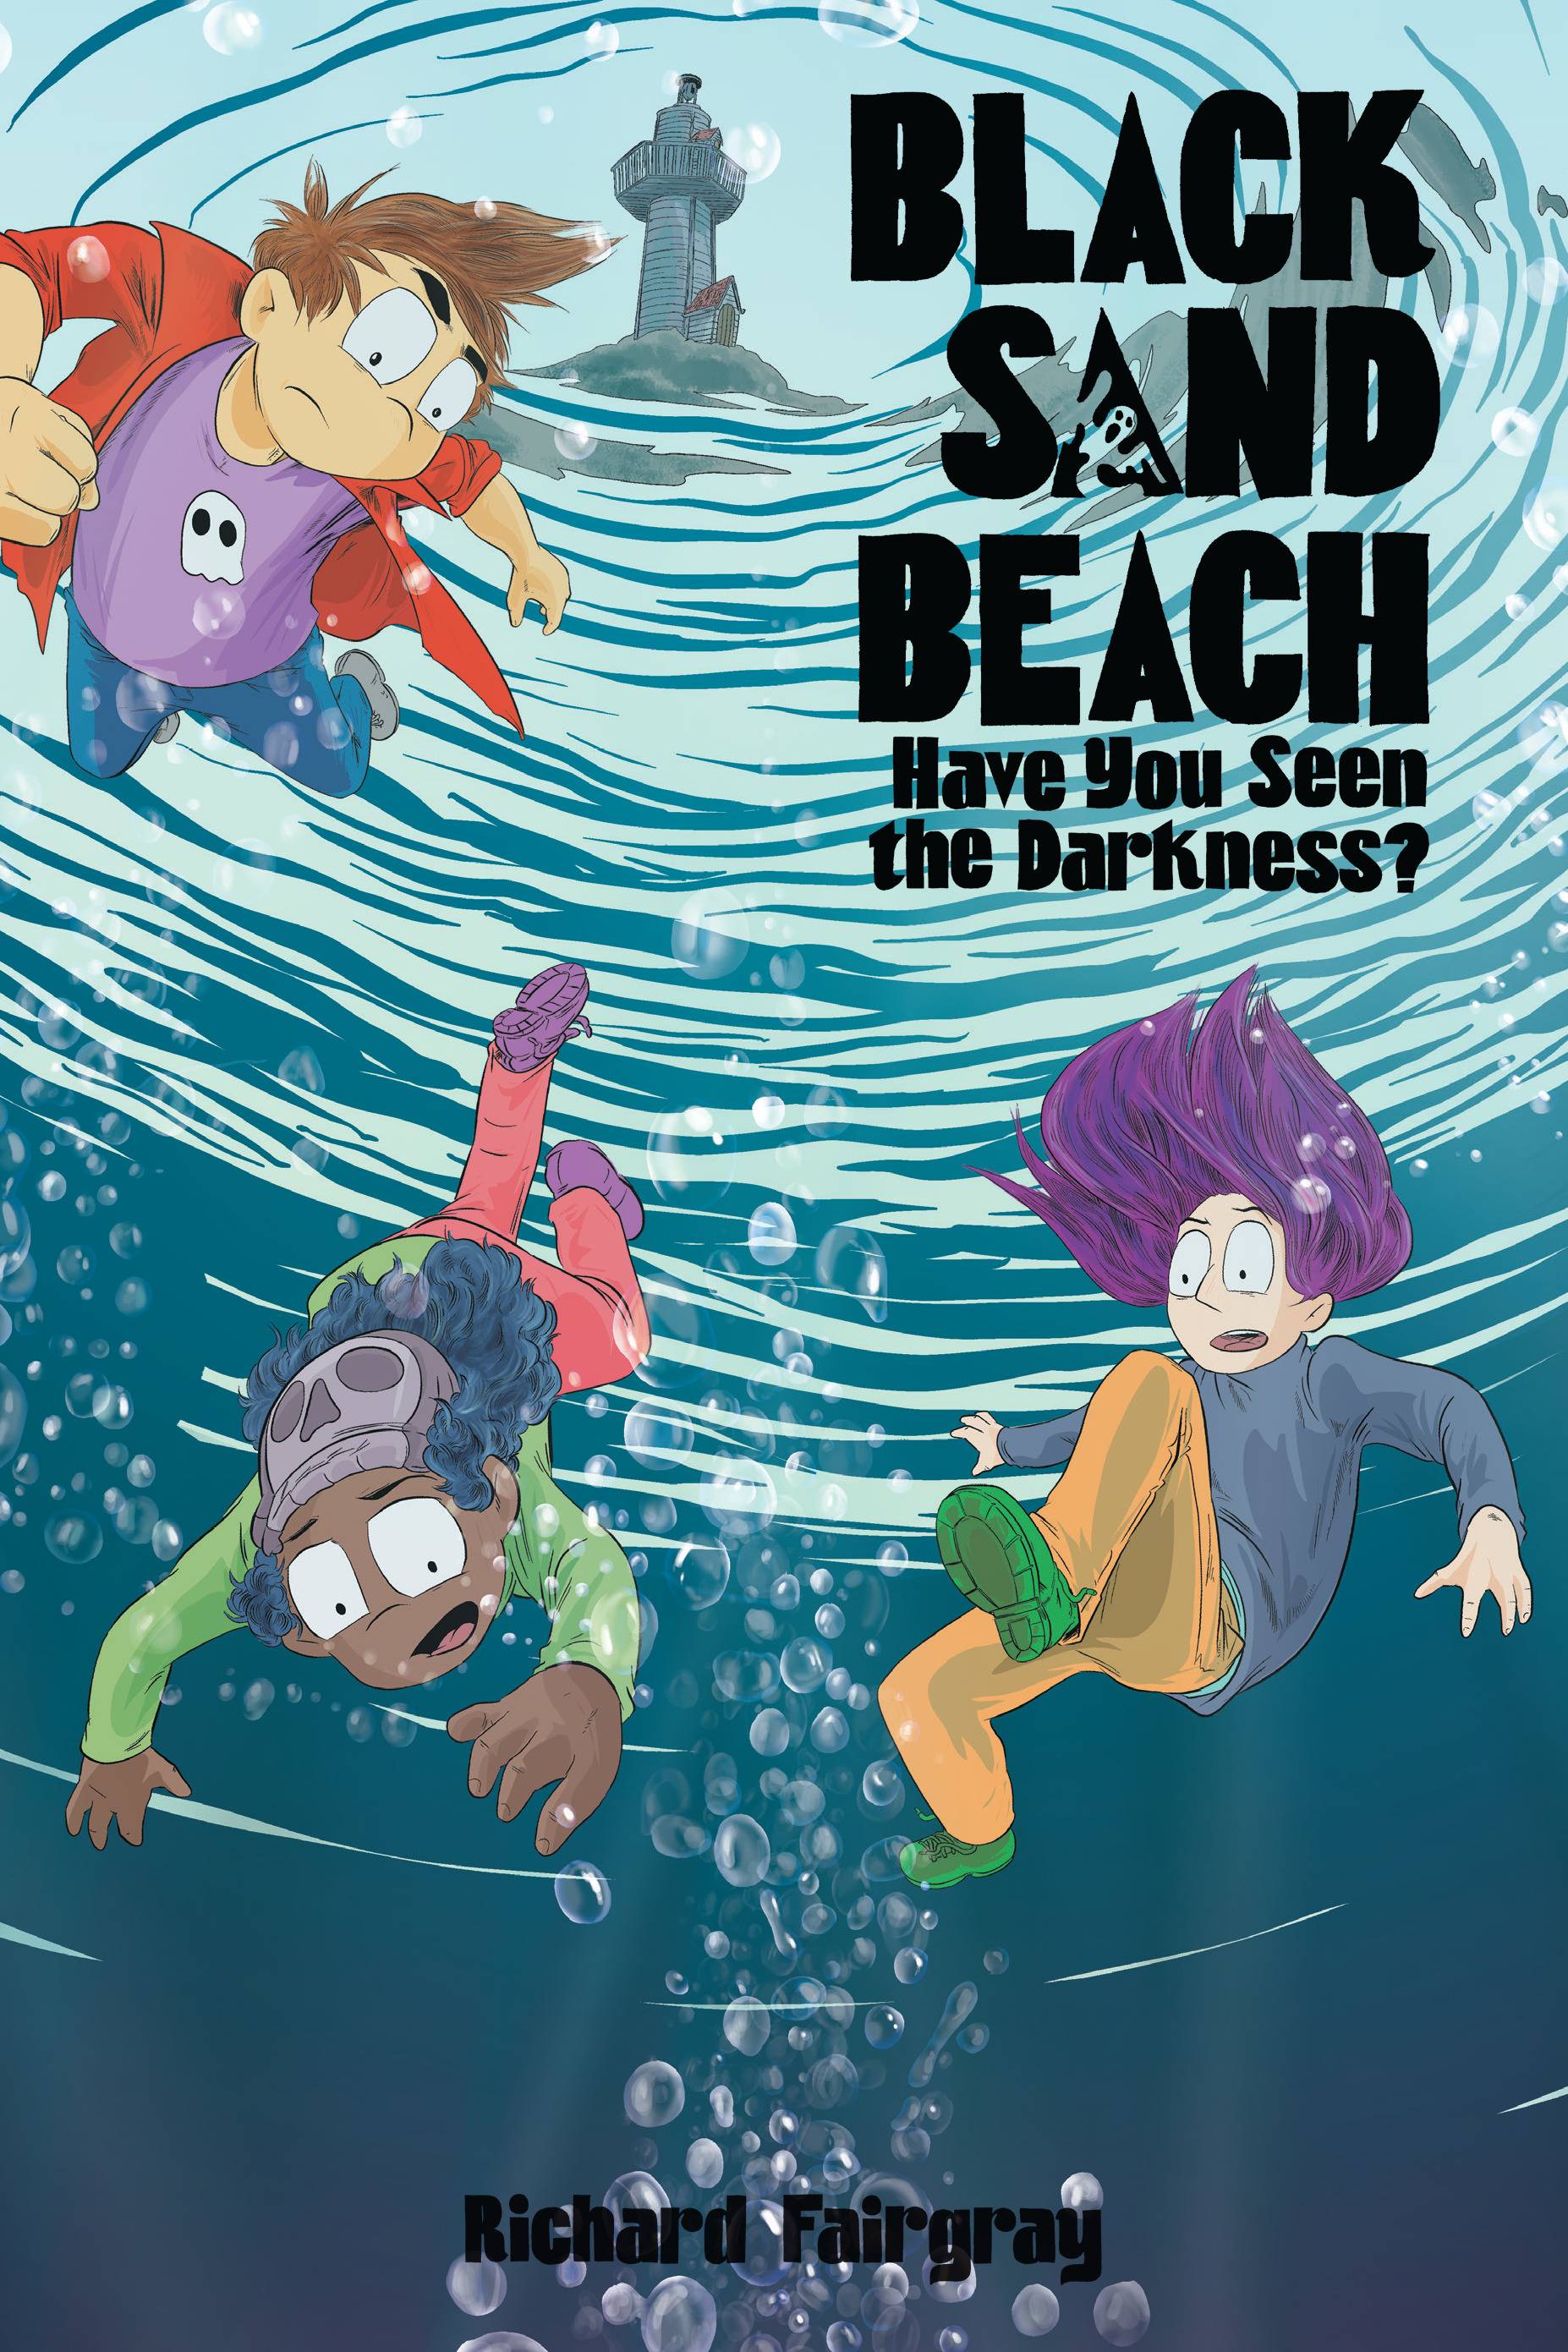 Black Sand Beach Graphic Novel Volume 3 Have You Seen the Darkness?